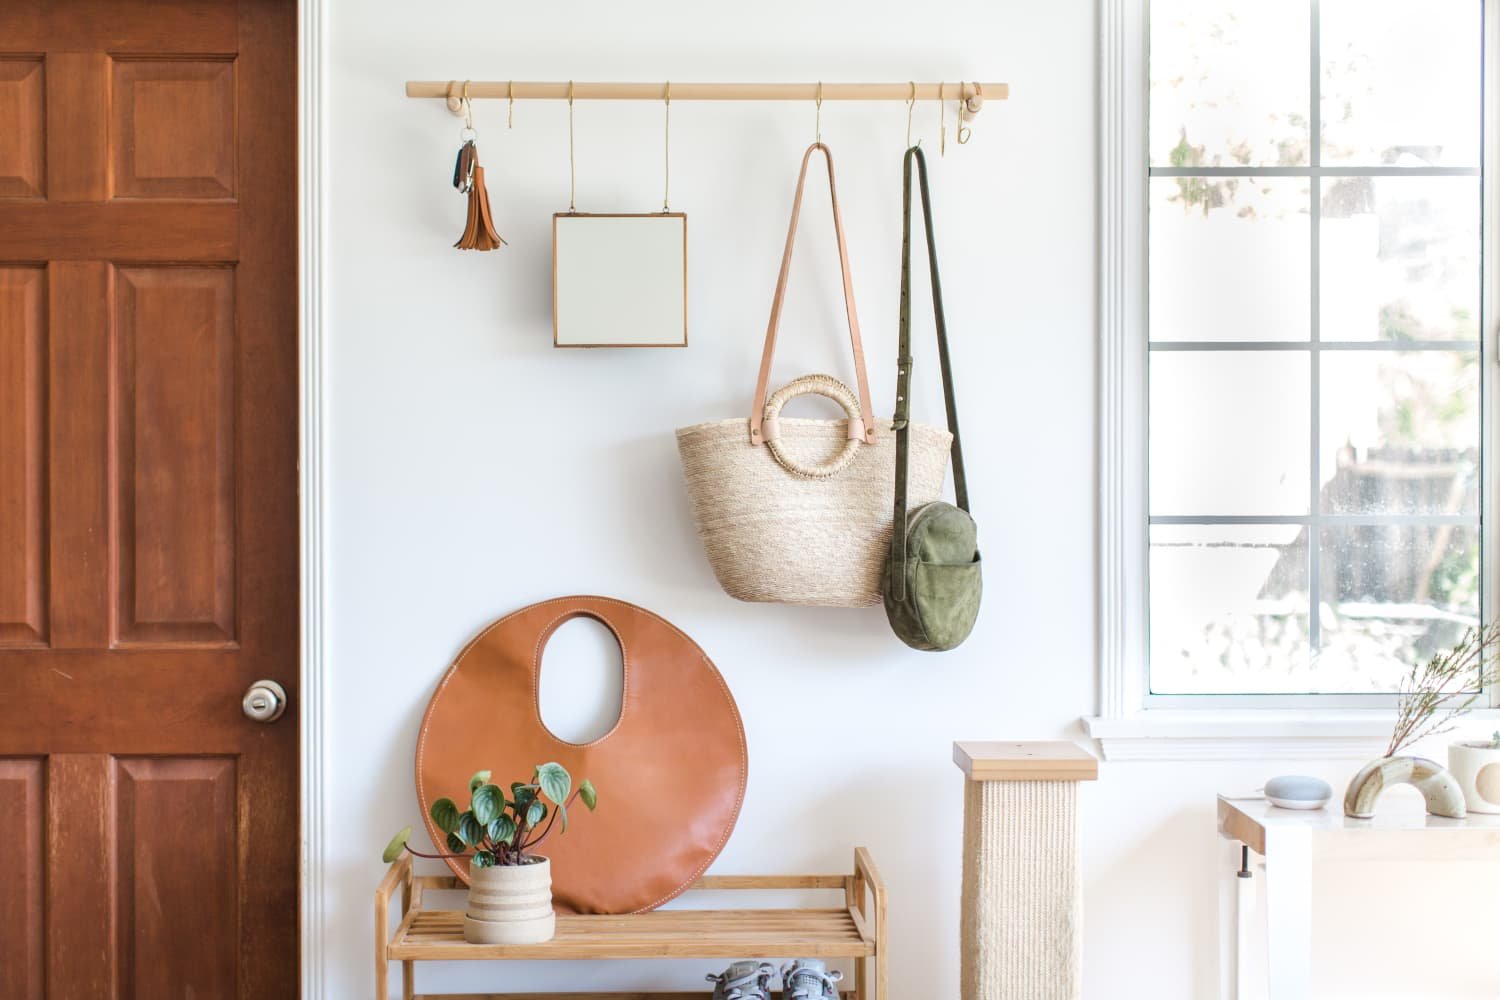 A Simple Daily Habit That Anyone Can Adopt to Keep Their Home More Organized, Around the Clock